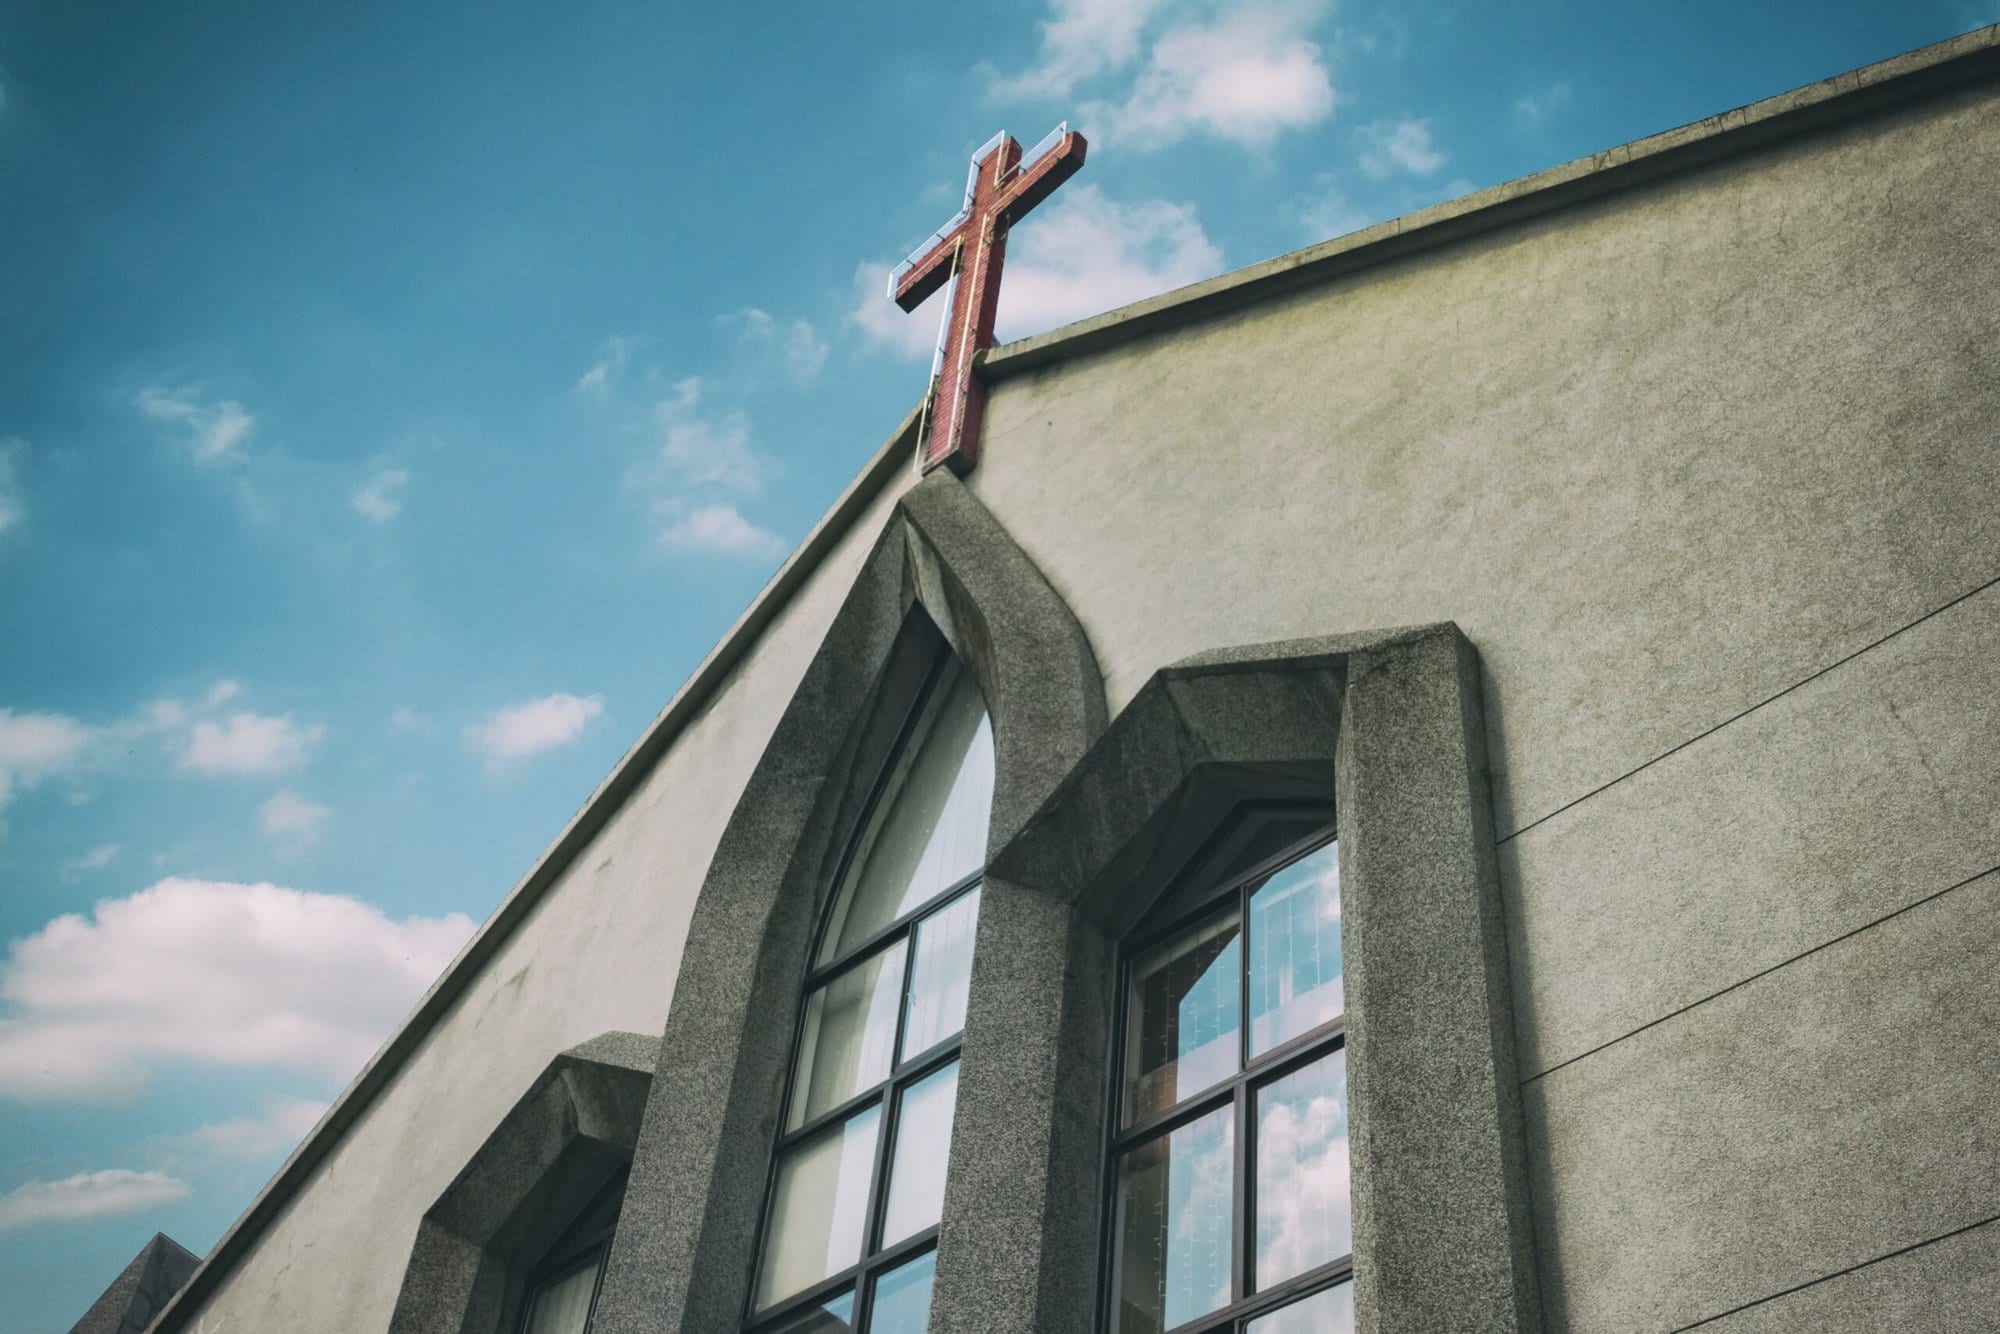 Employee Retention Tax Credit for Churches and Synagogues